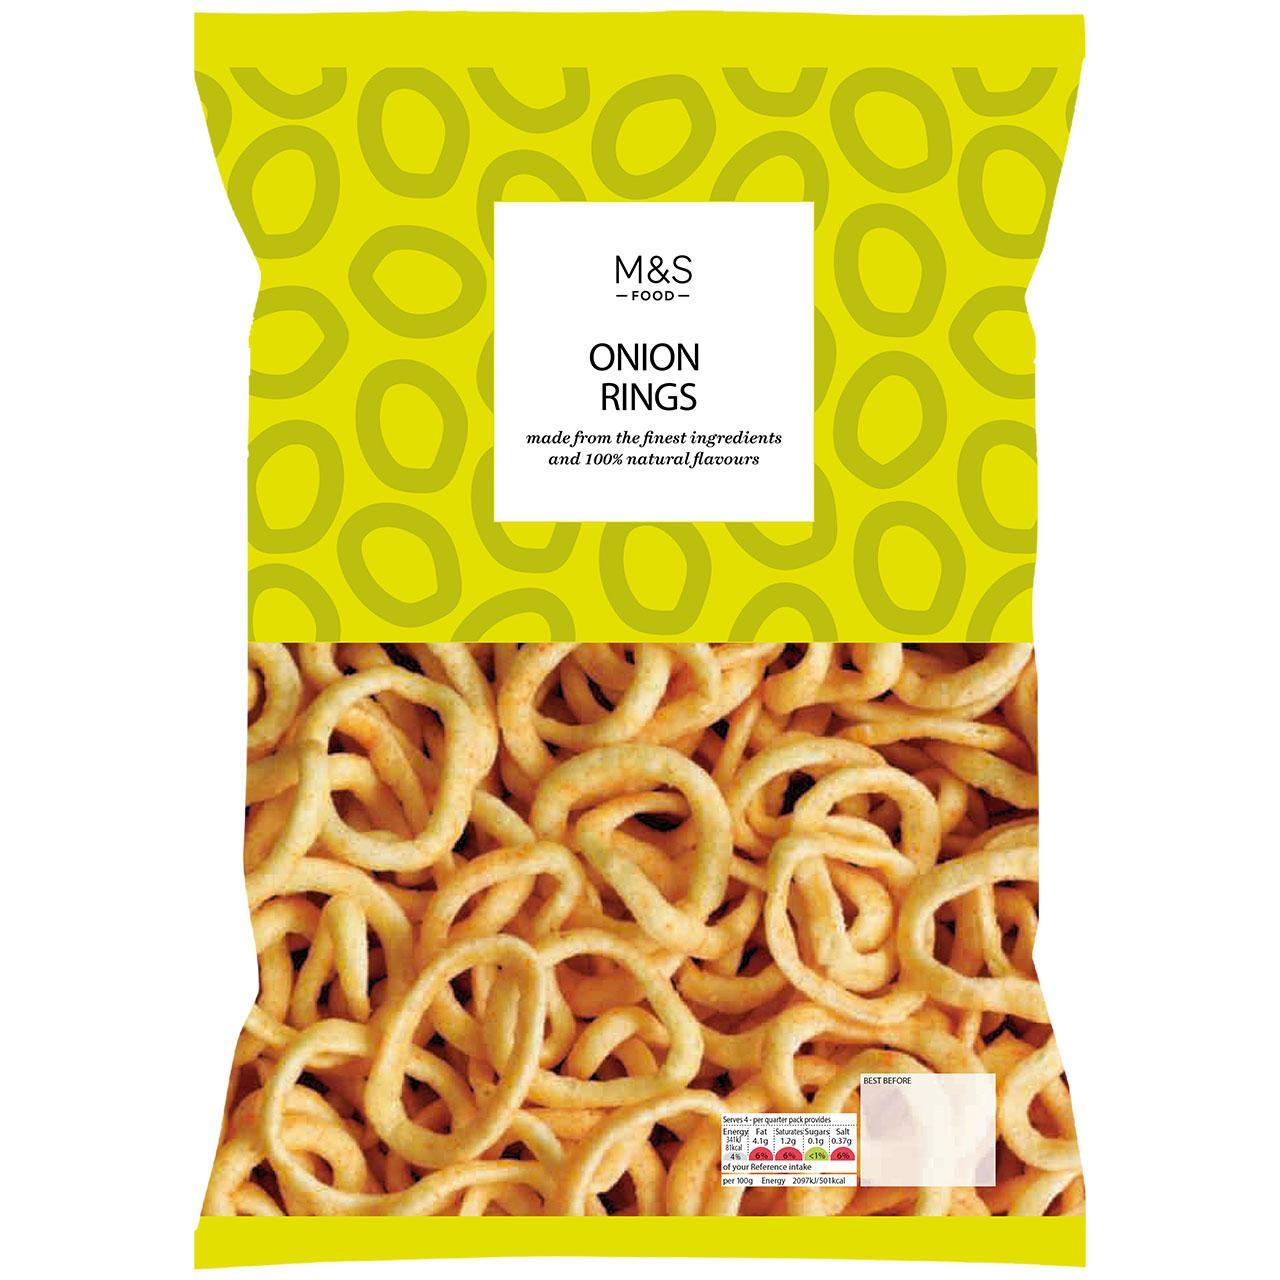 Morrisons Onion Rings (6 x 17g) - Compare Prices & Where To Buy -  Trolley.co.uk